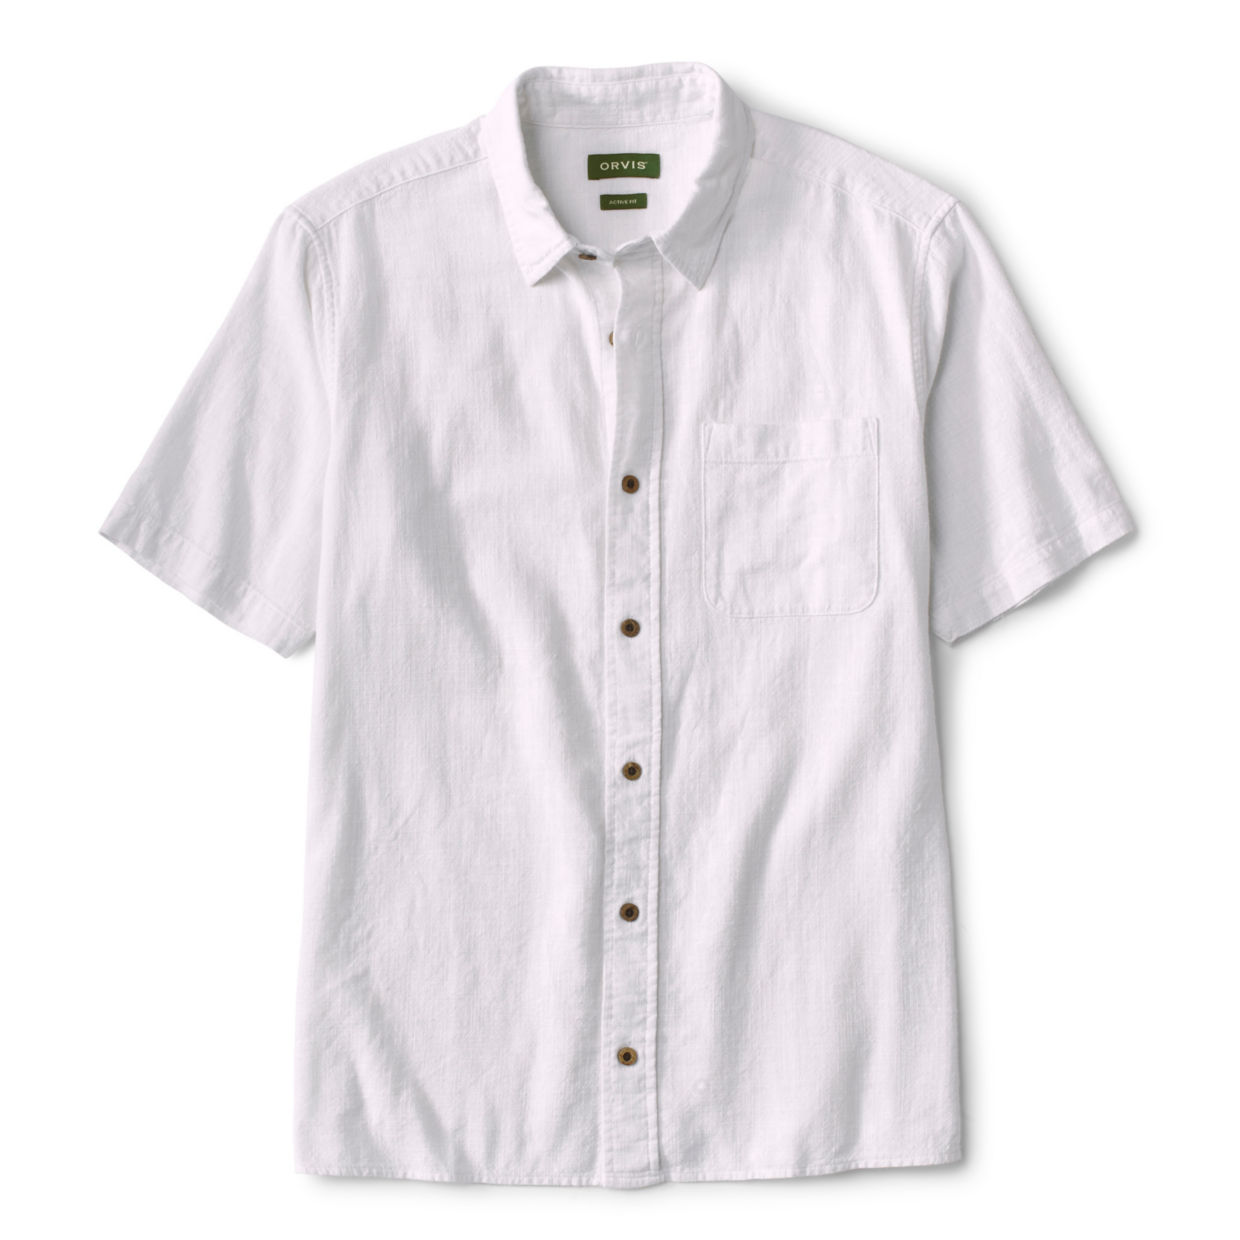 Men's Rugged Air Pigment-Dyed Short-Sleeved Shirt White Size Small Cotton Orvis